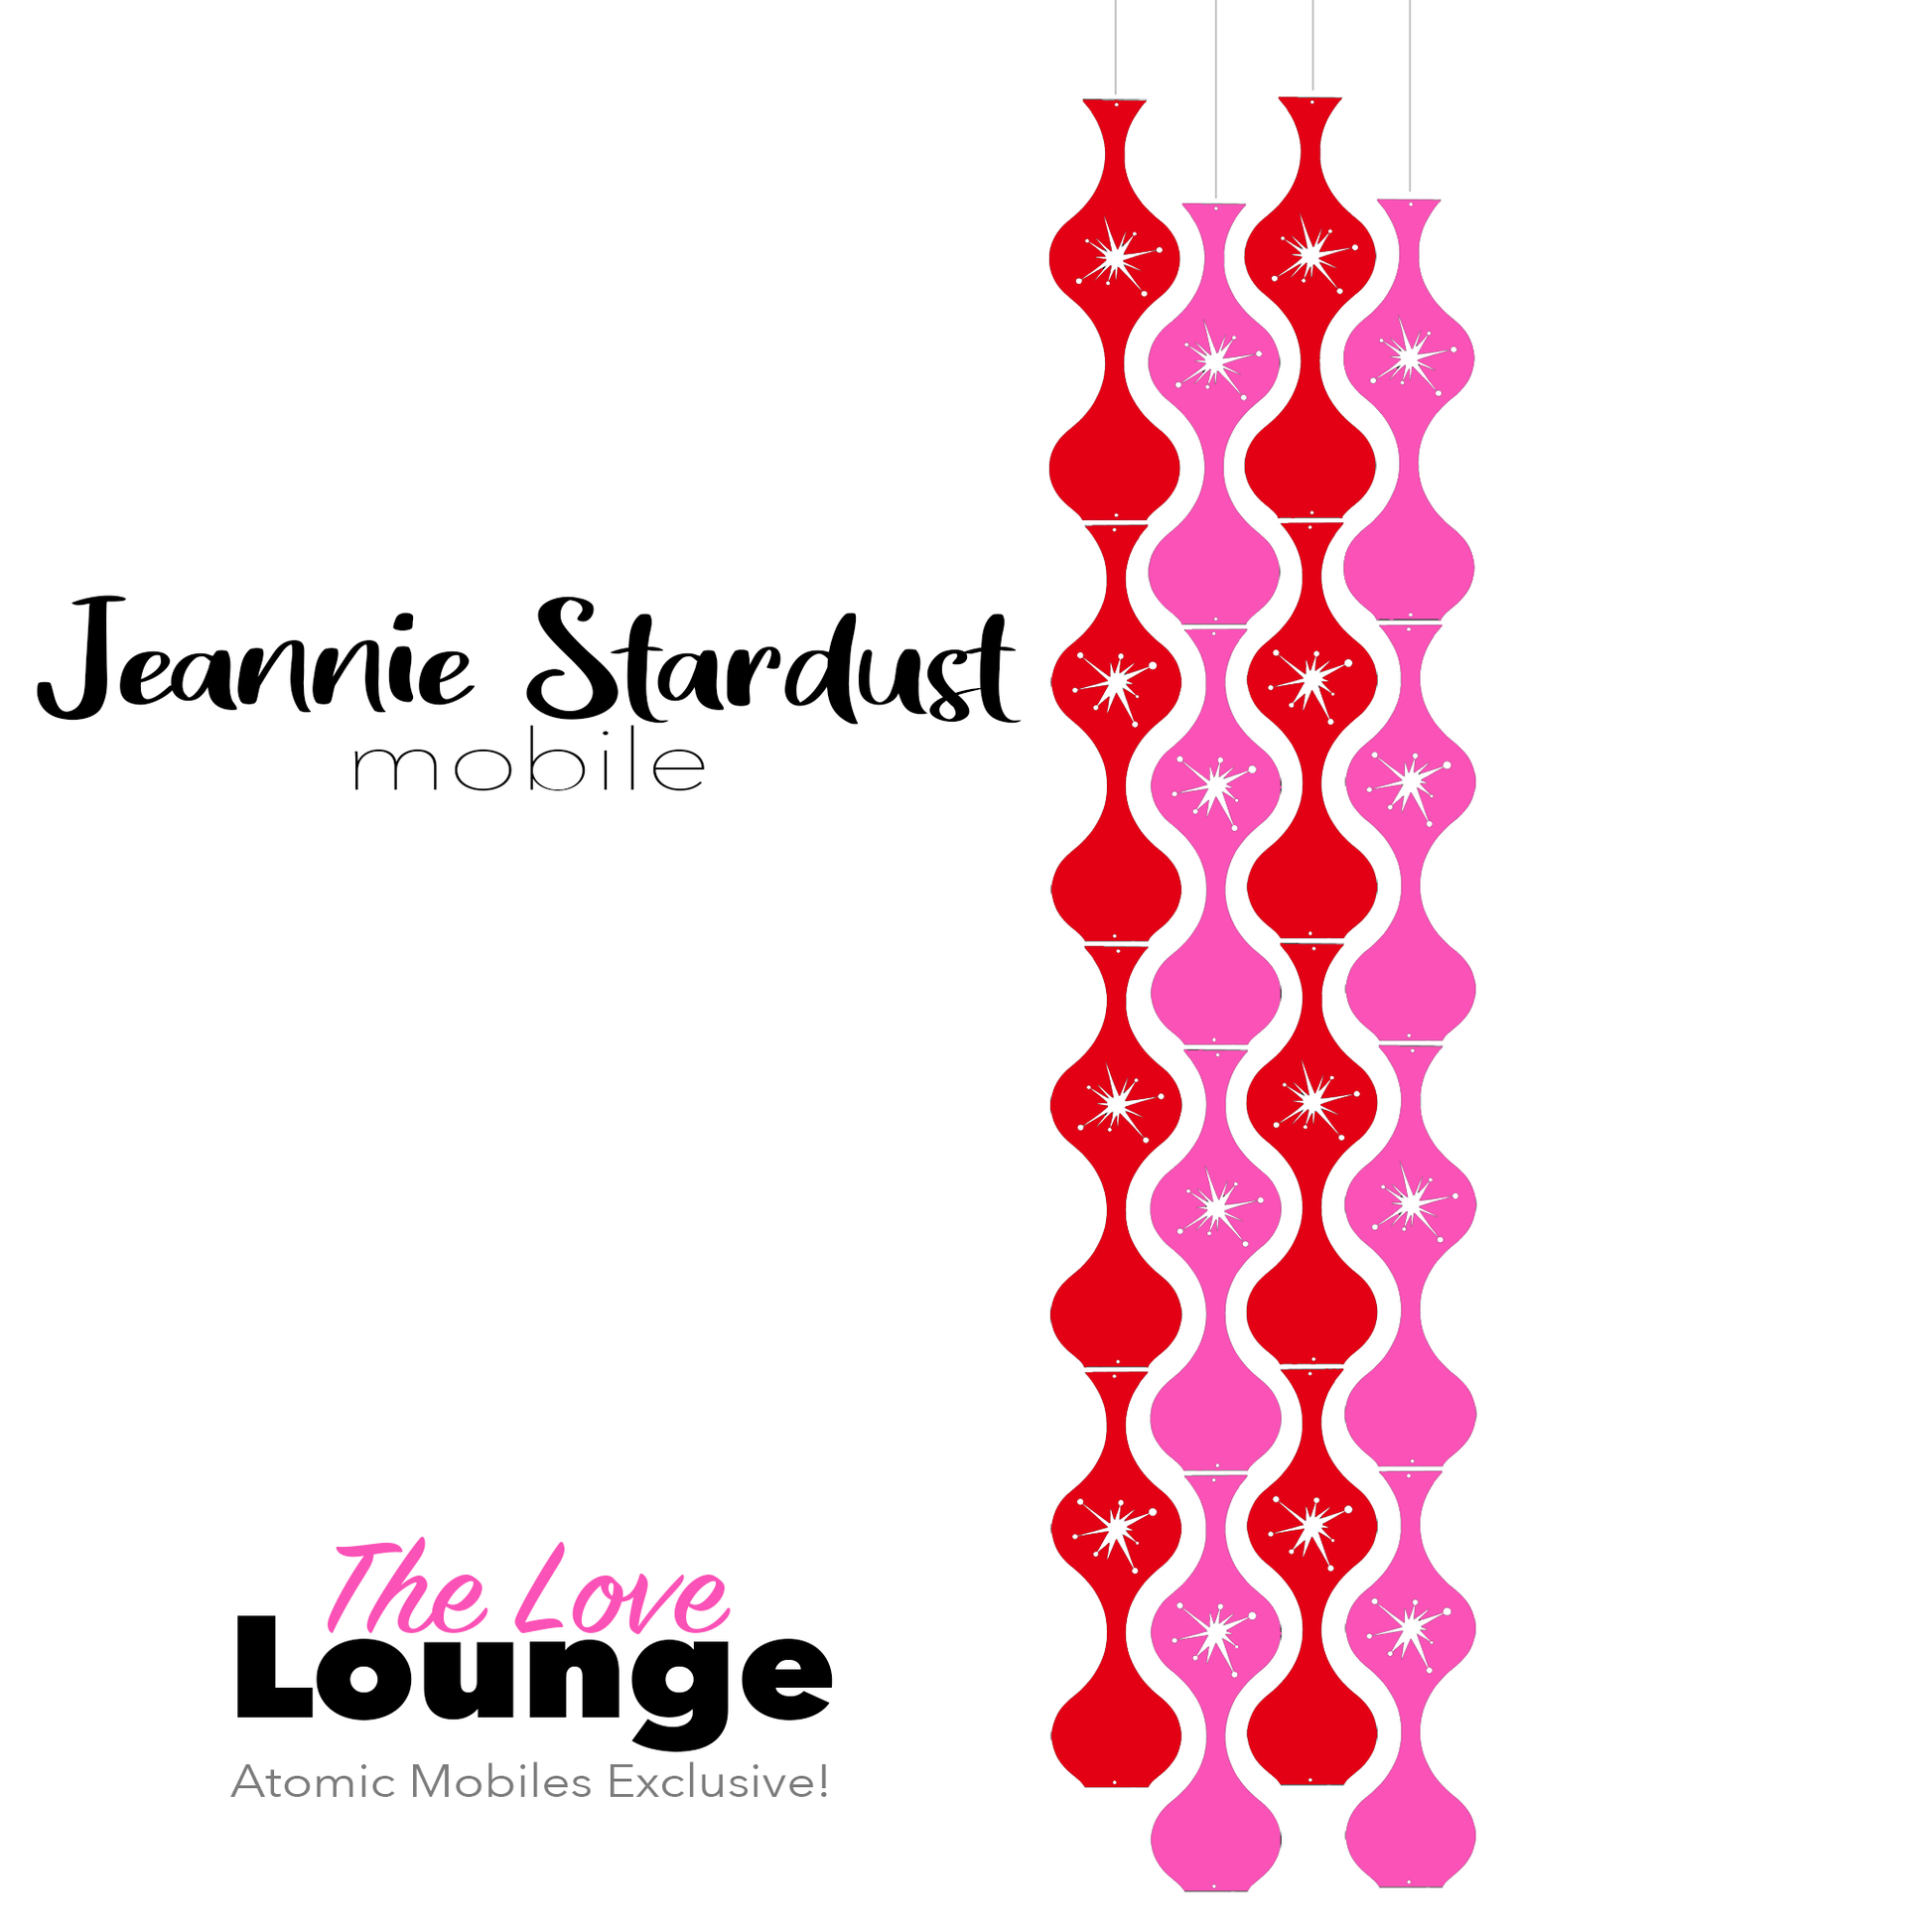 The Love Lounge Jeannie Stardust Hanging Art Mobile - mid century modern home decor in Red and Hot Pink - by AtomicMobiles.com